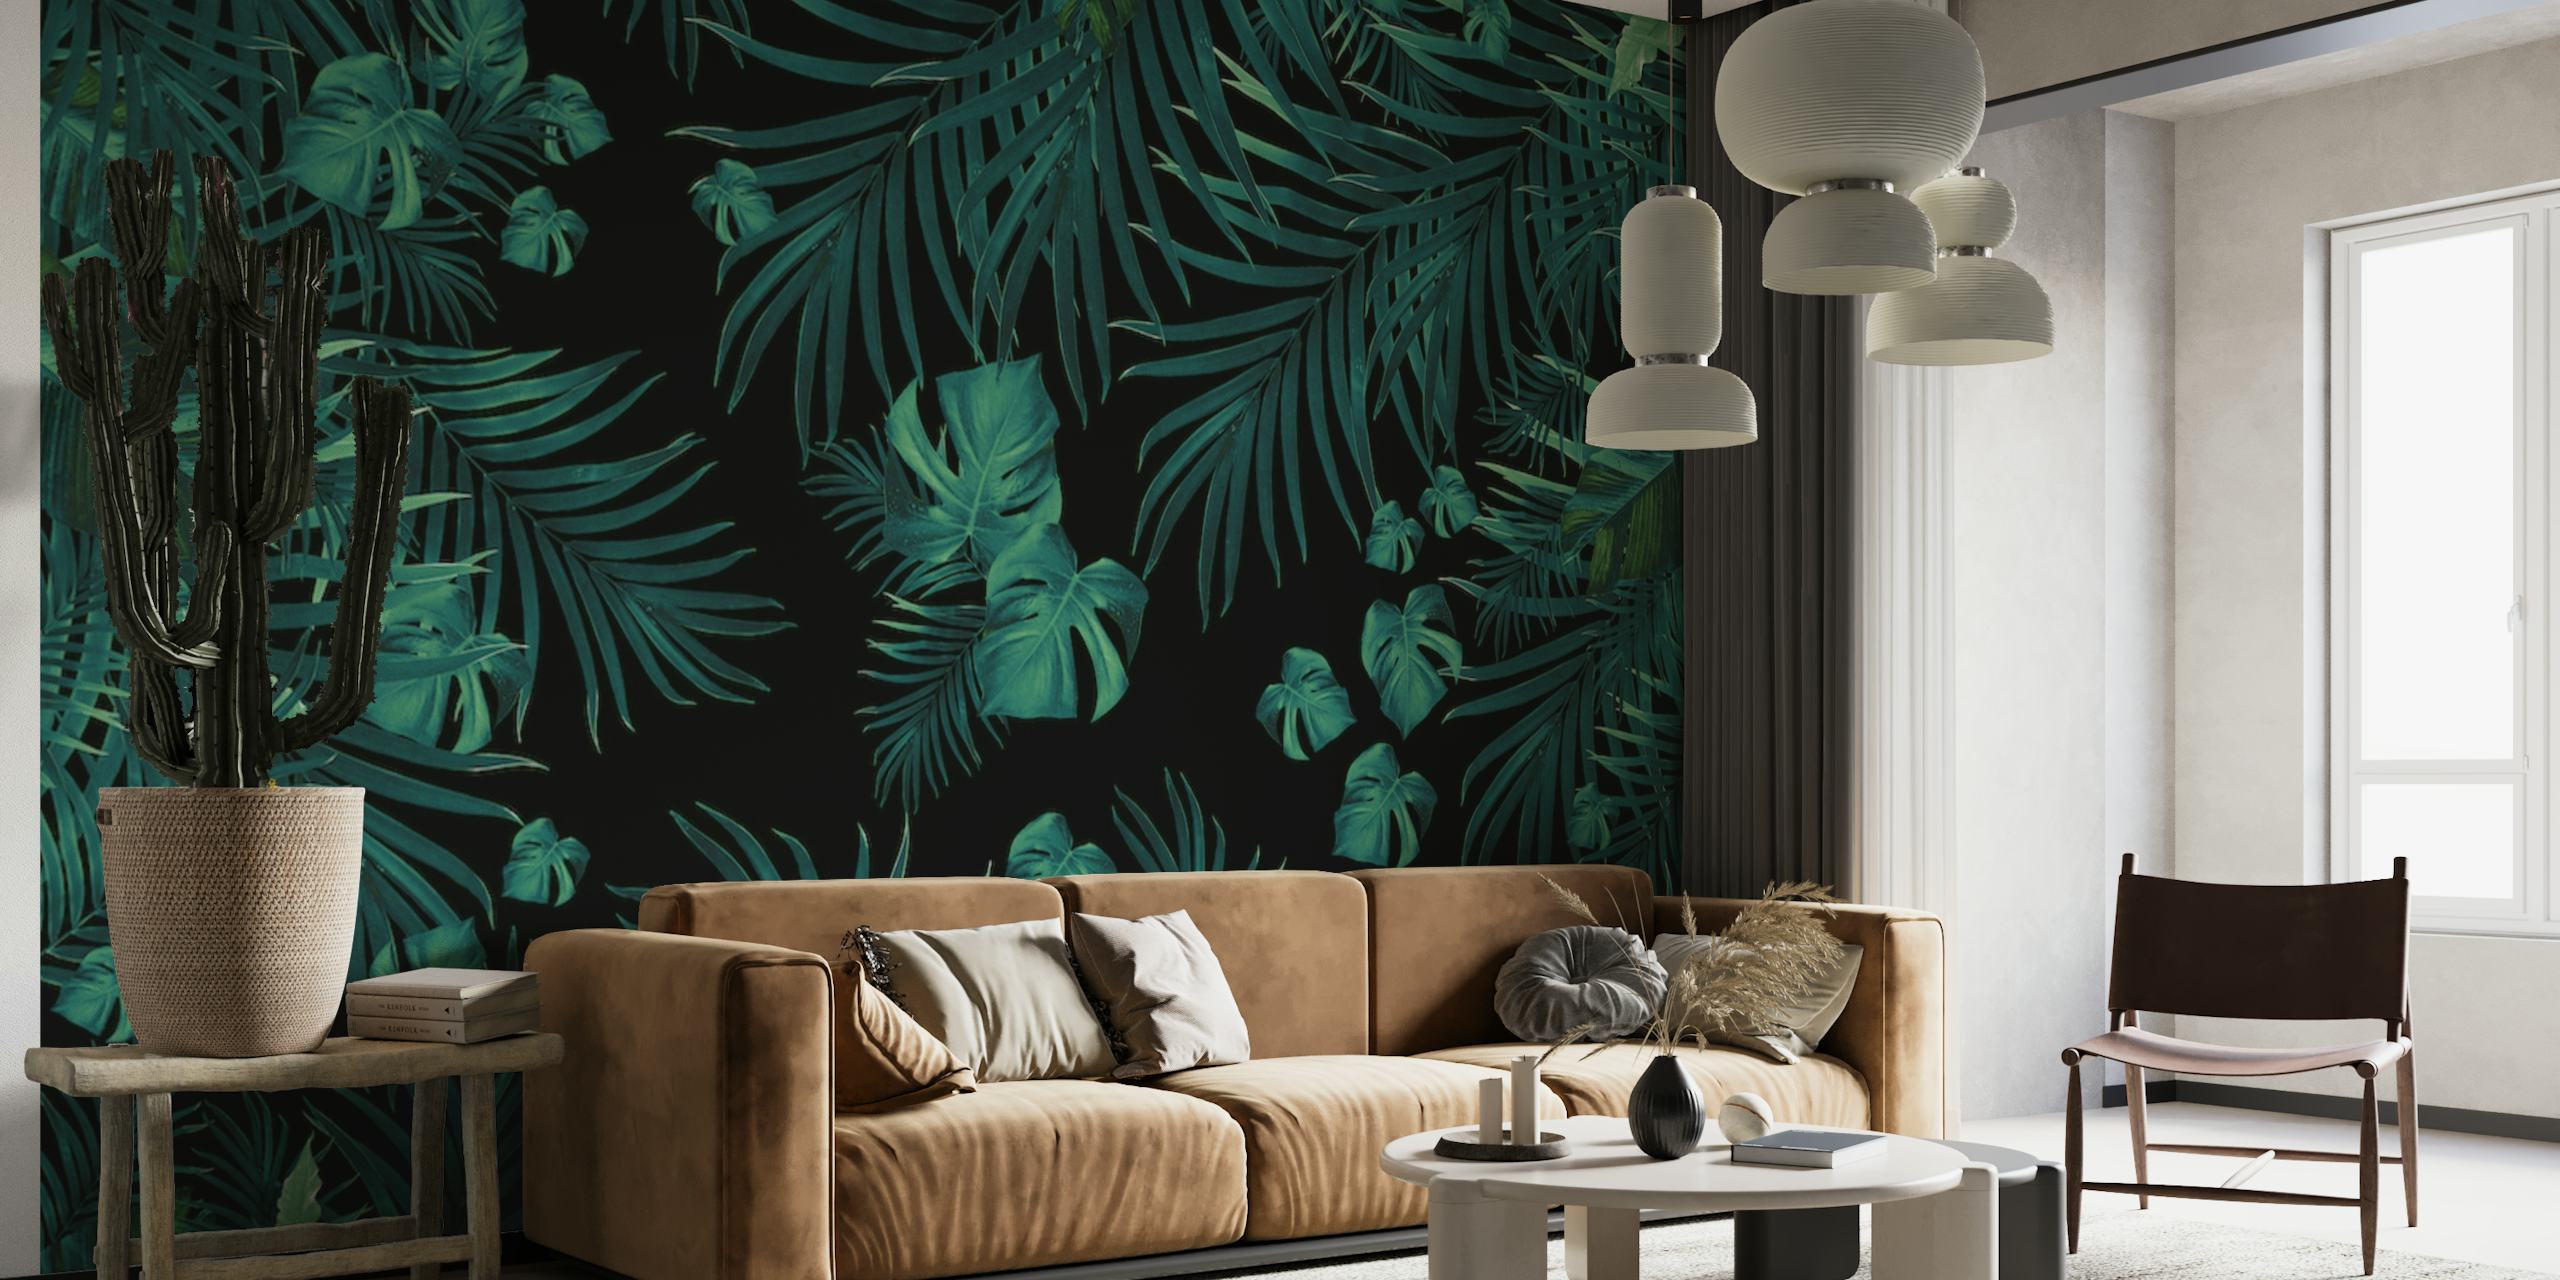 Tropical jungle leaves in dark green shades, creating a mysterious night-time atmosphere.